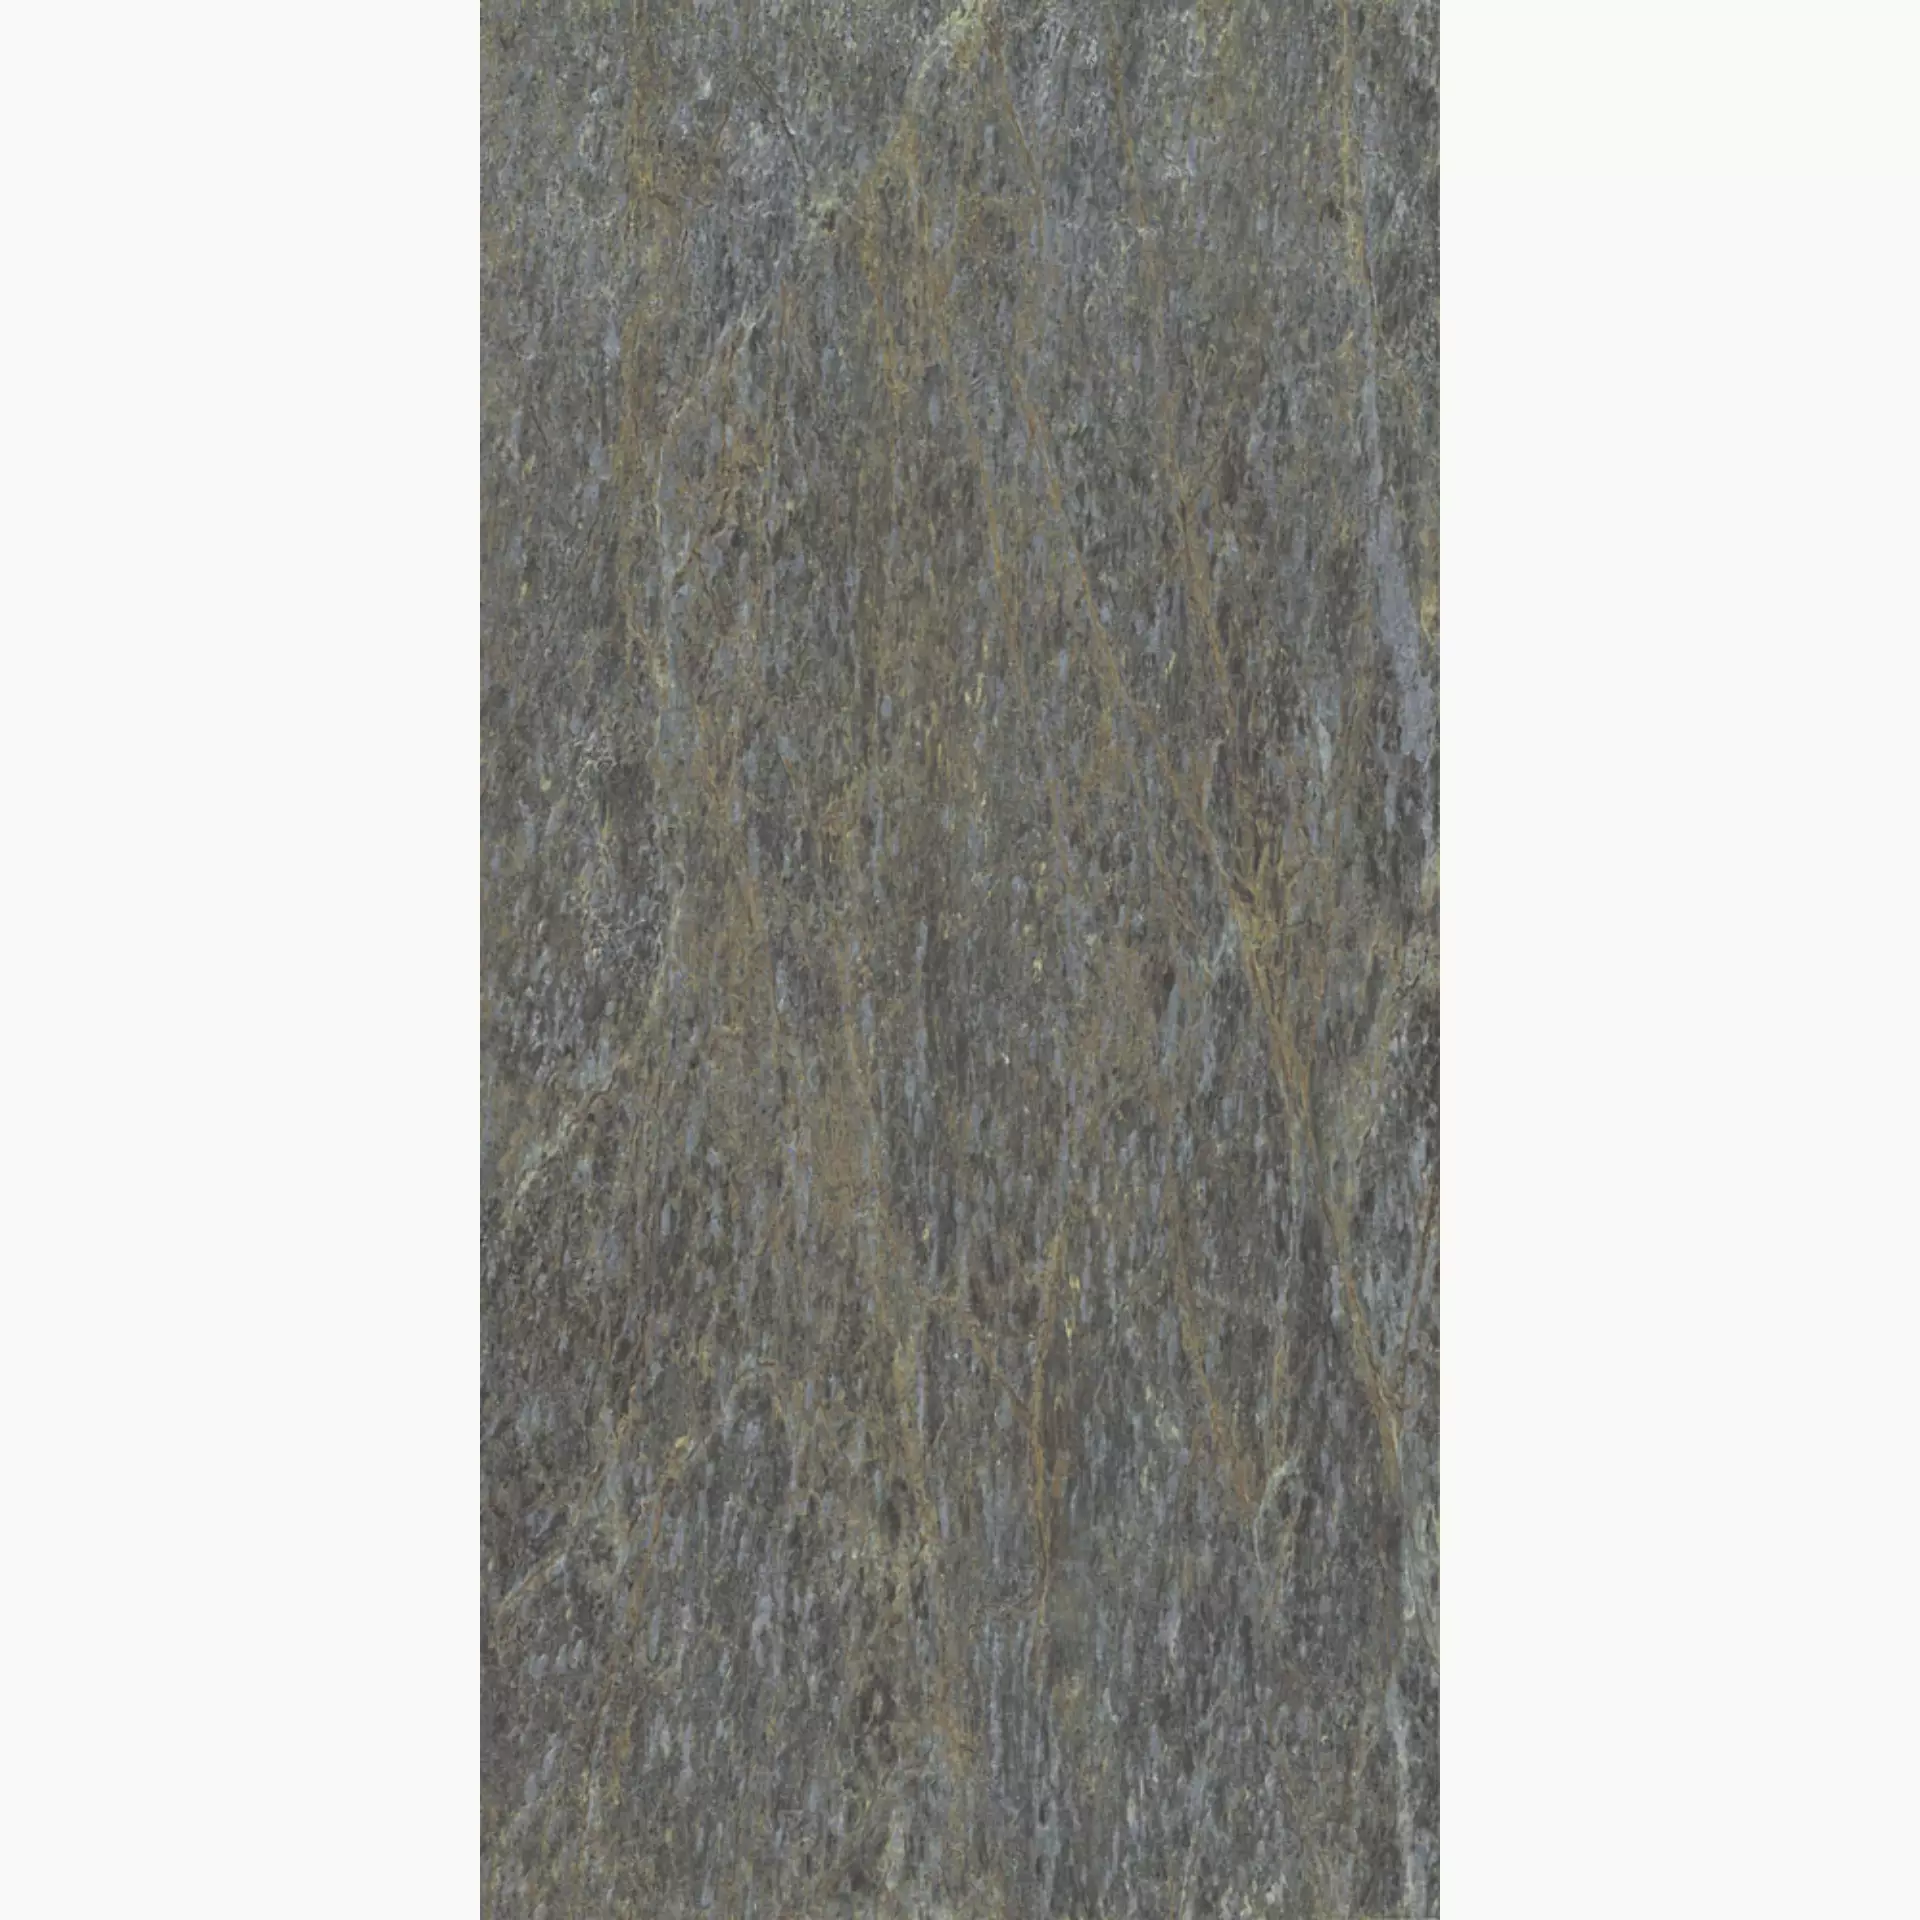 Sant Agostino Unionstone 2 Serpentino Natural CSASRPNT60 60x120cm rectified 10mm